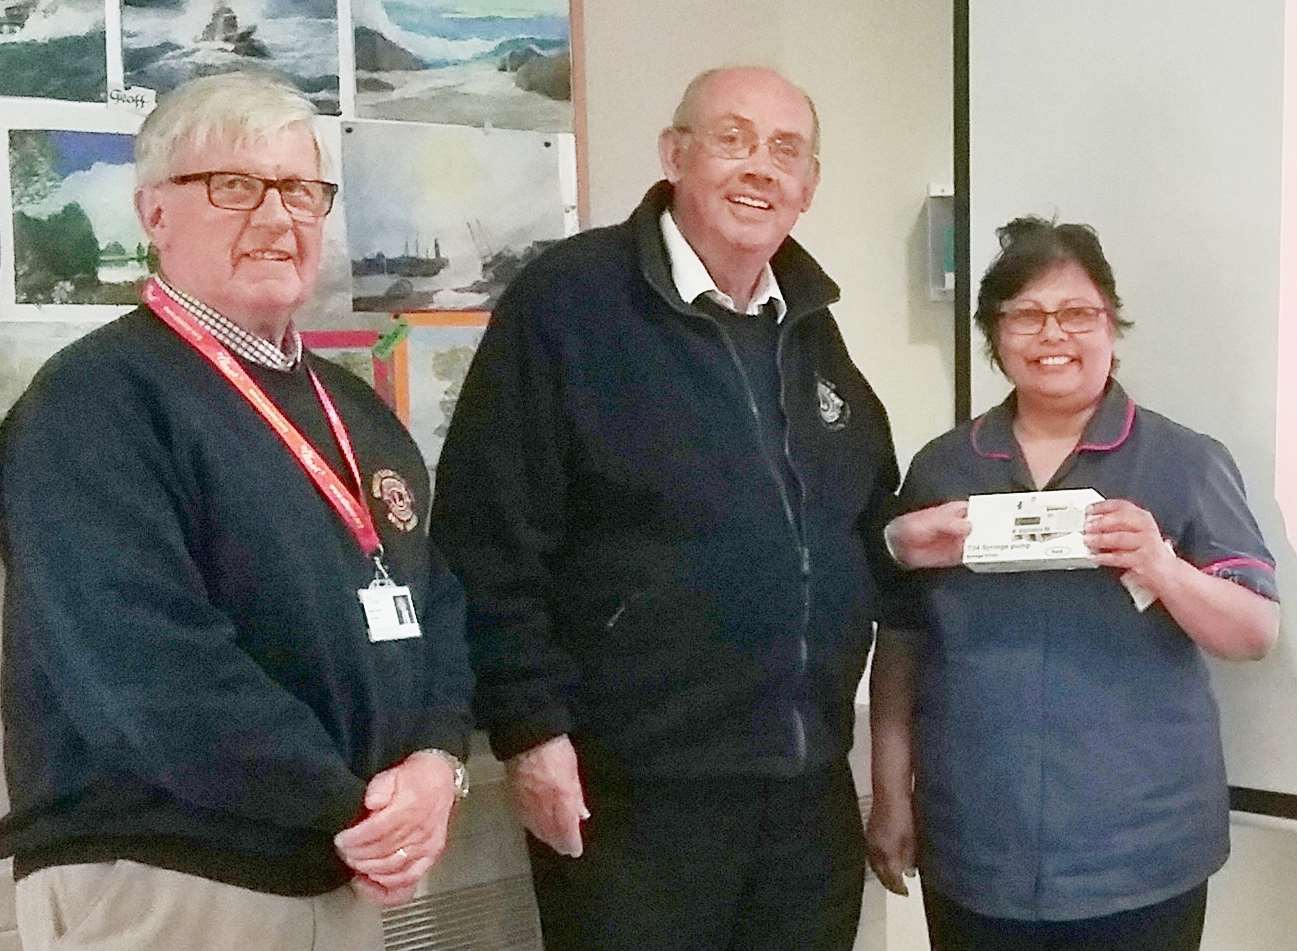 The Swanley and North Downs Lions Club welfare chairman Steve Gray (centre) with fundraising chairman Bryan Harris and ellenor inpatient ward manager Angela Cooke